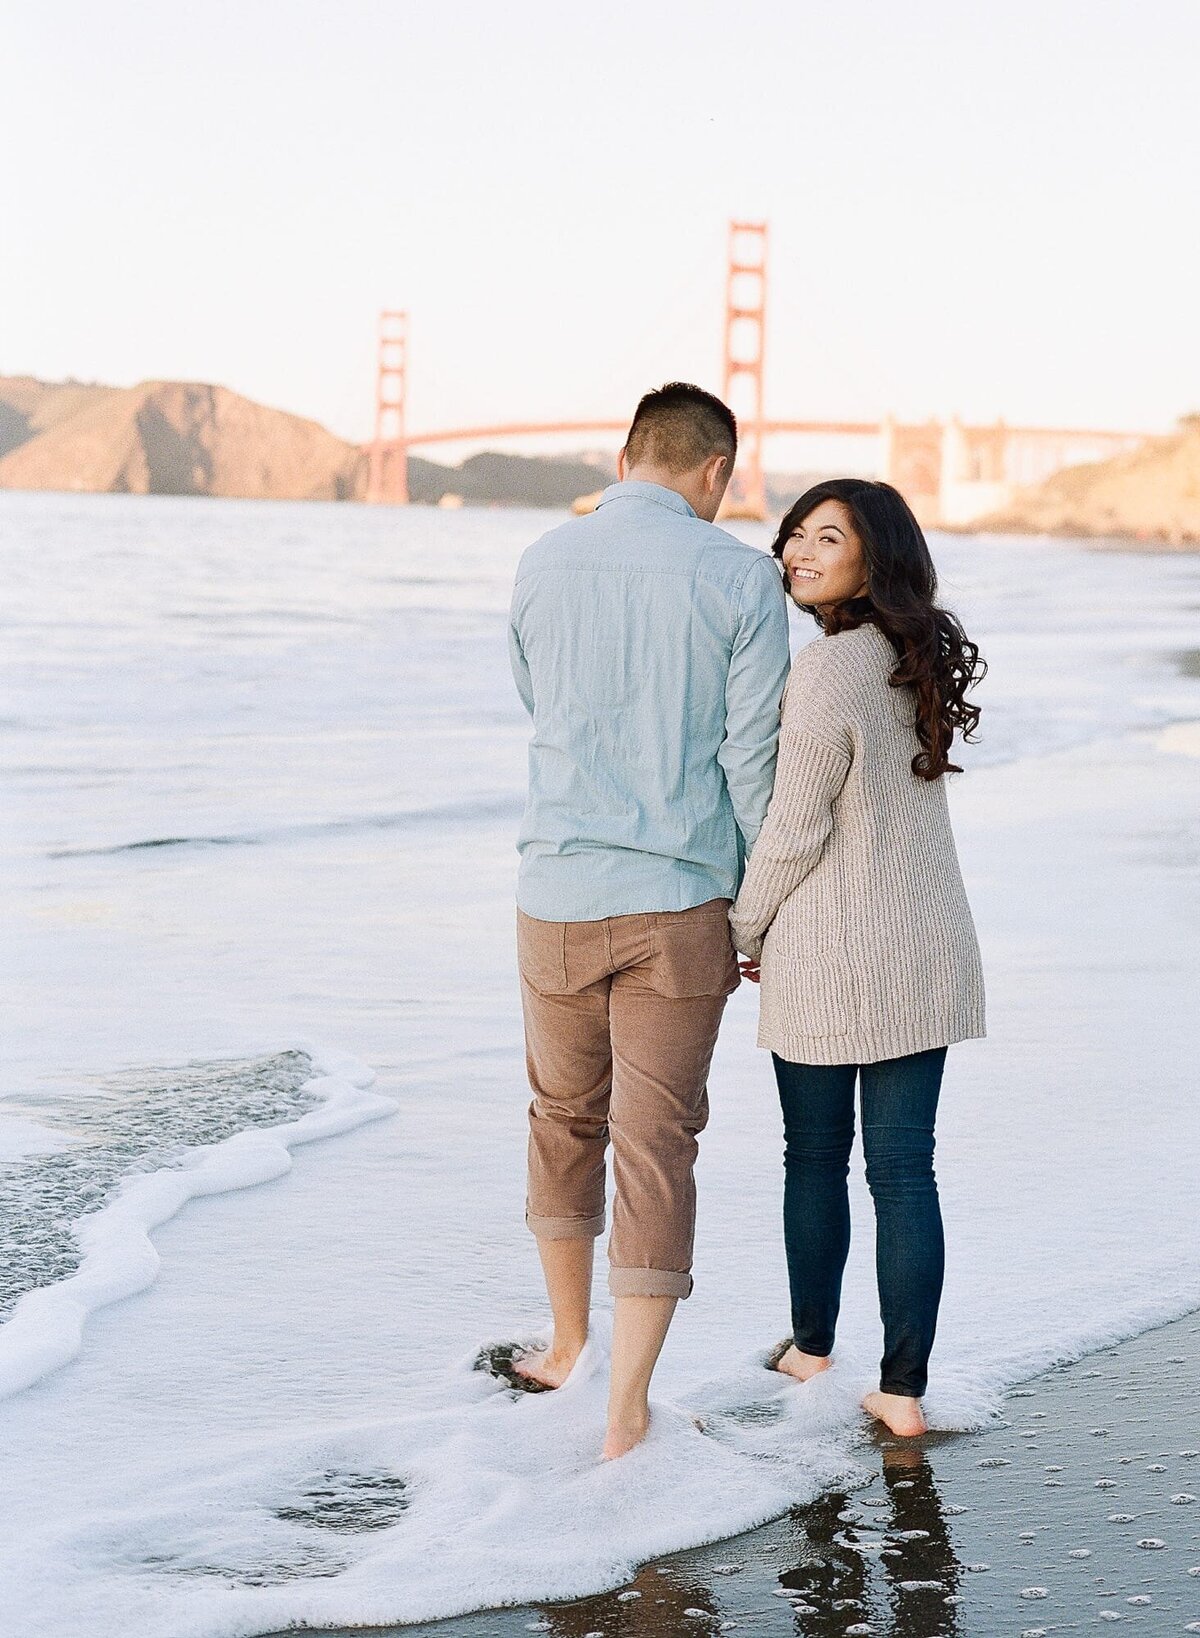 Engagement Photographer in San Francisco perfectly capsulates a lifetime memory of a romantic couple walking by the beach.